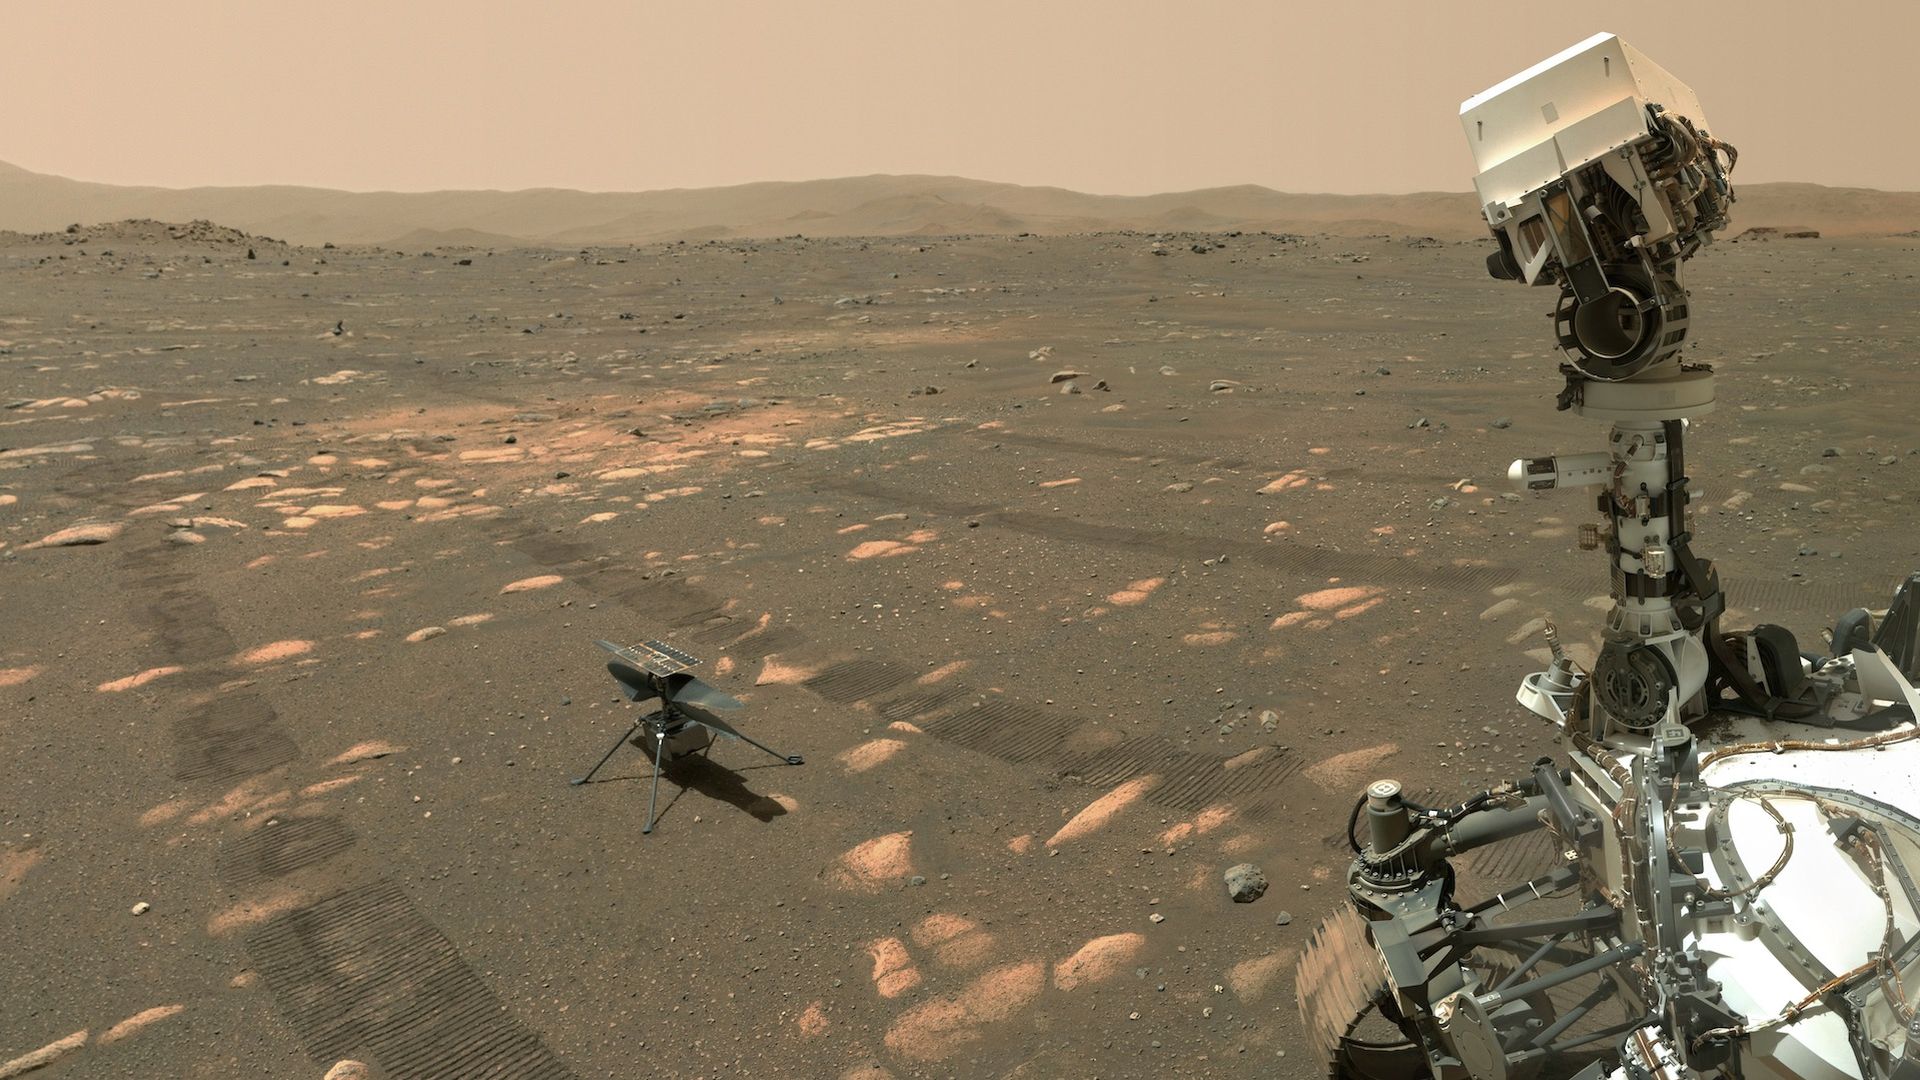 The little helicopter Ingenuity sits on Mars as the Perseverance rover looks at it, taking a photo